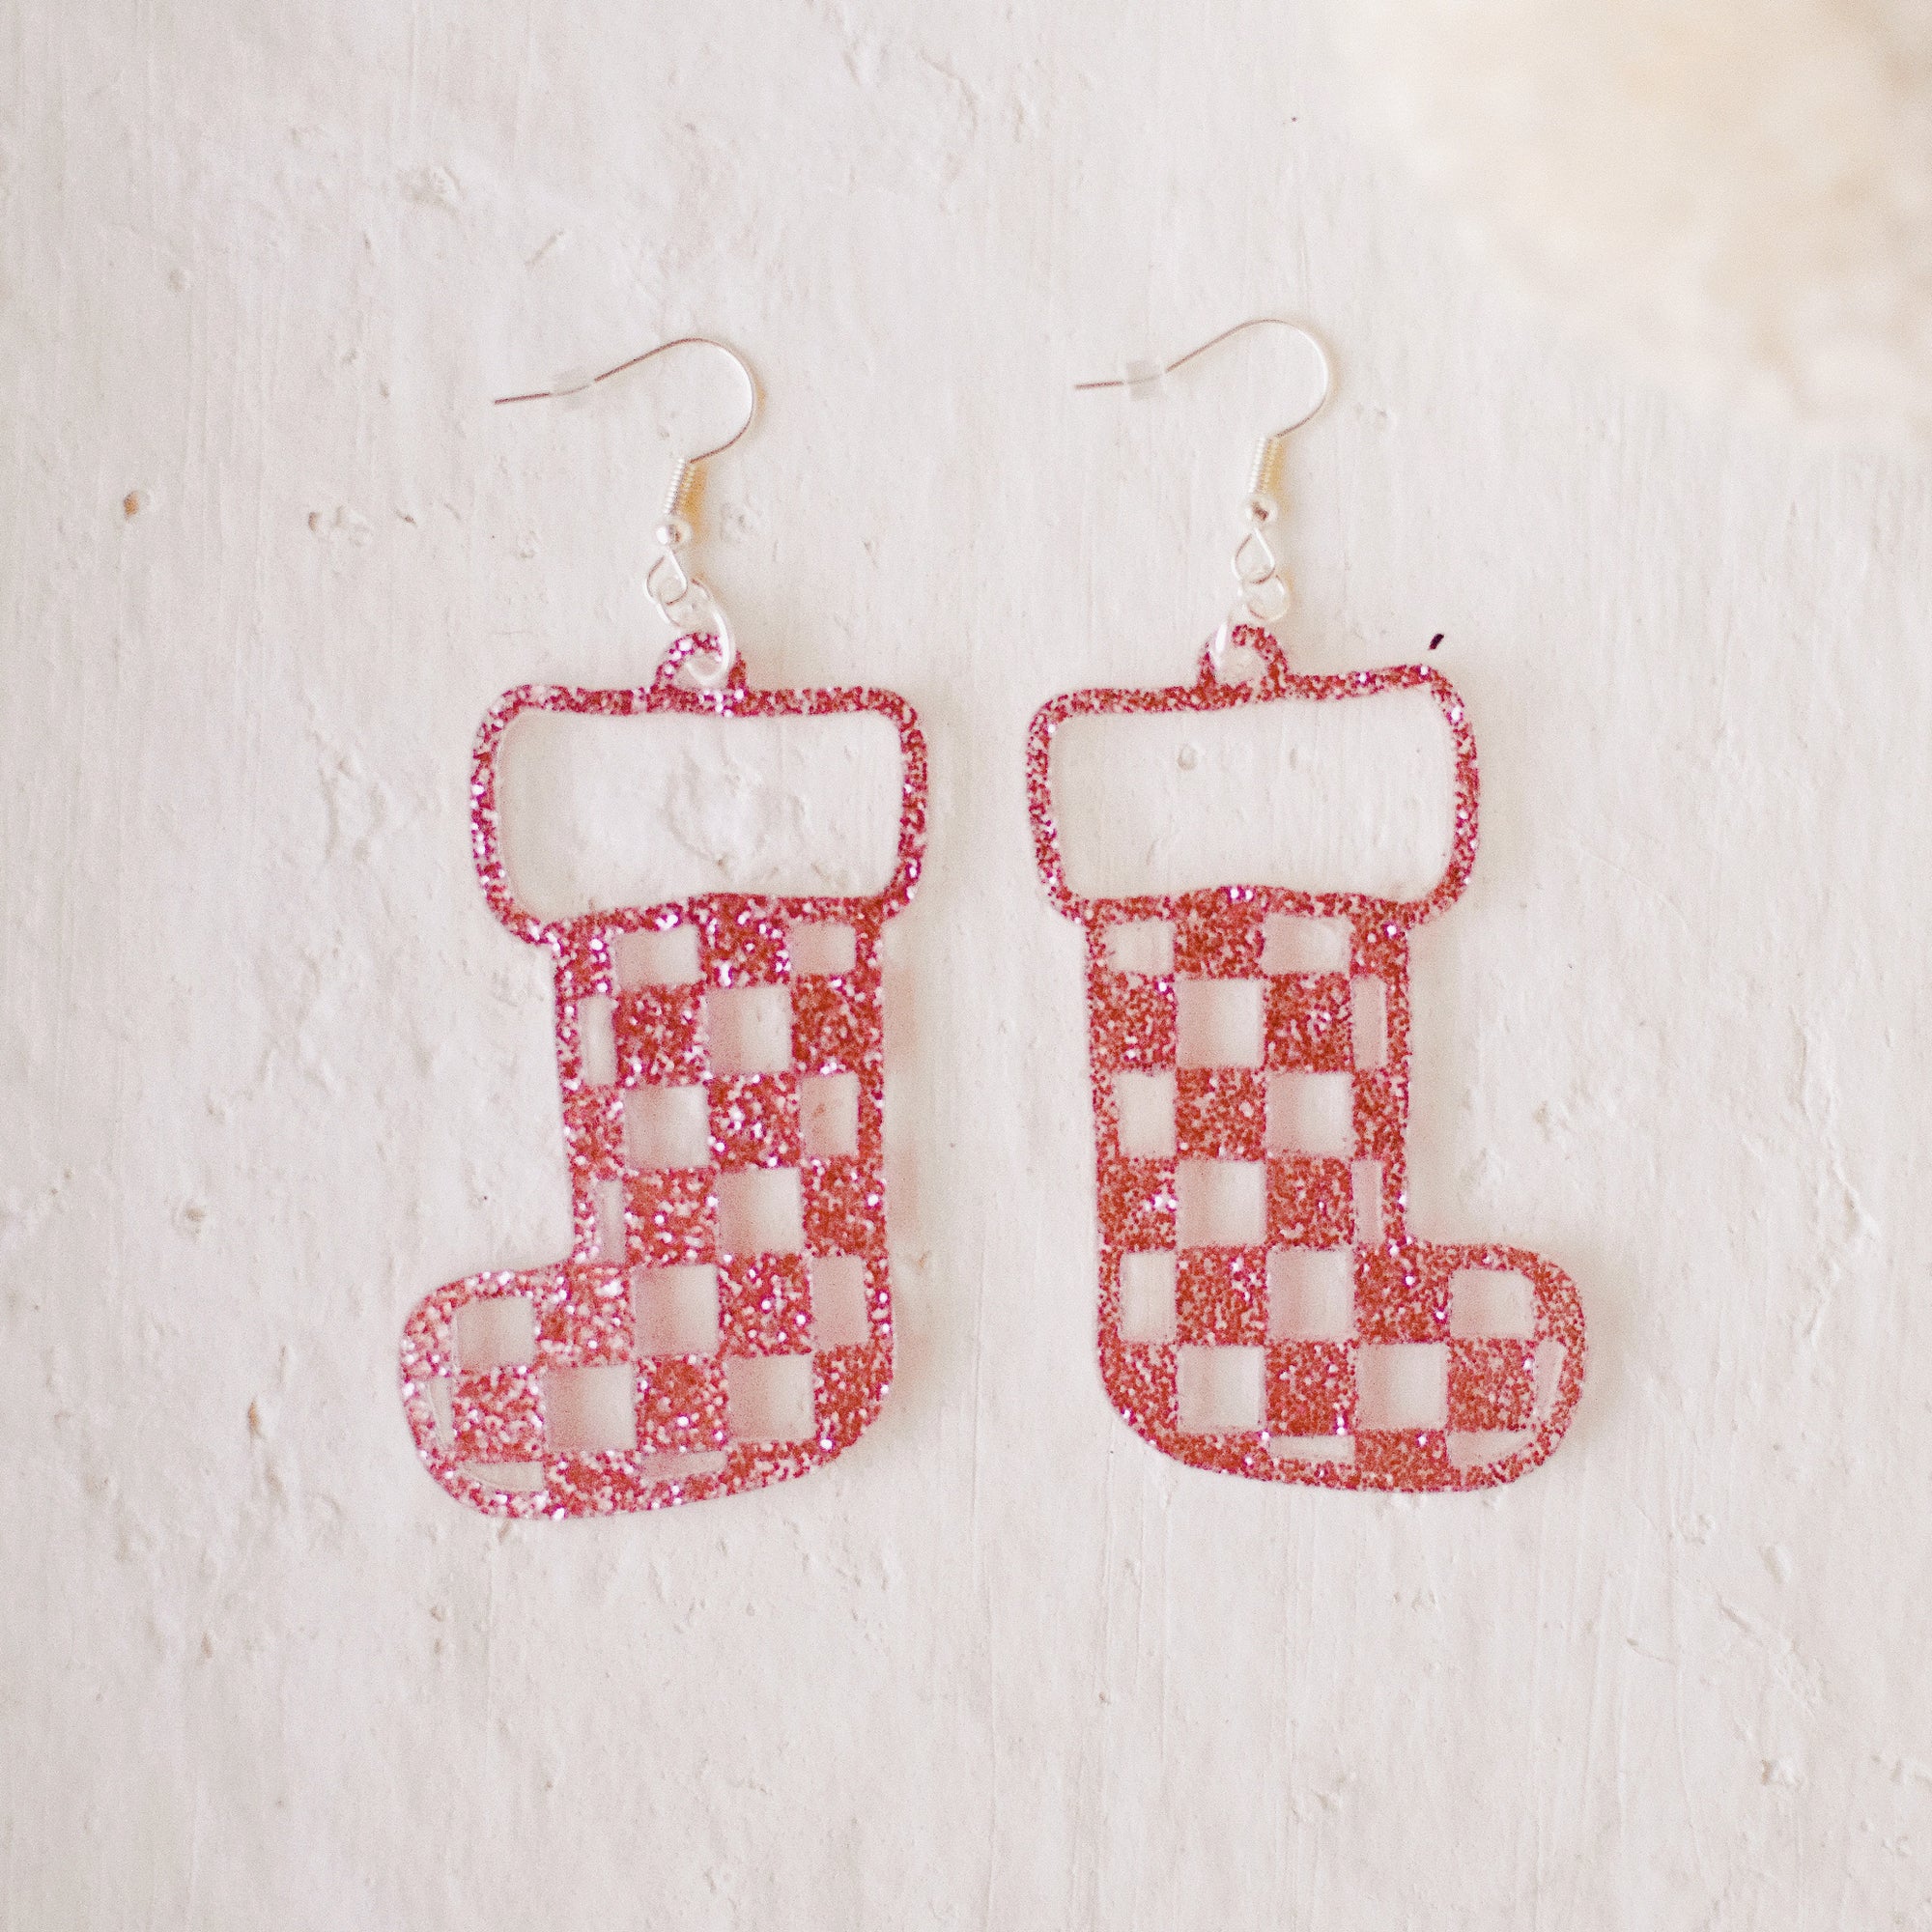 Earrings - Christmas - Sparkle Pink Checkered Stocking Dangles